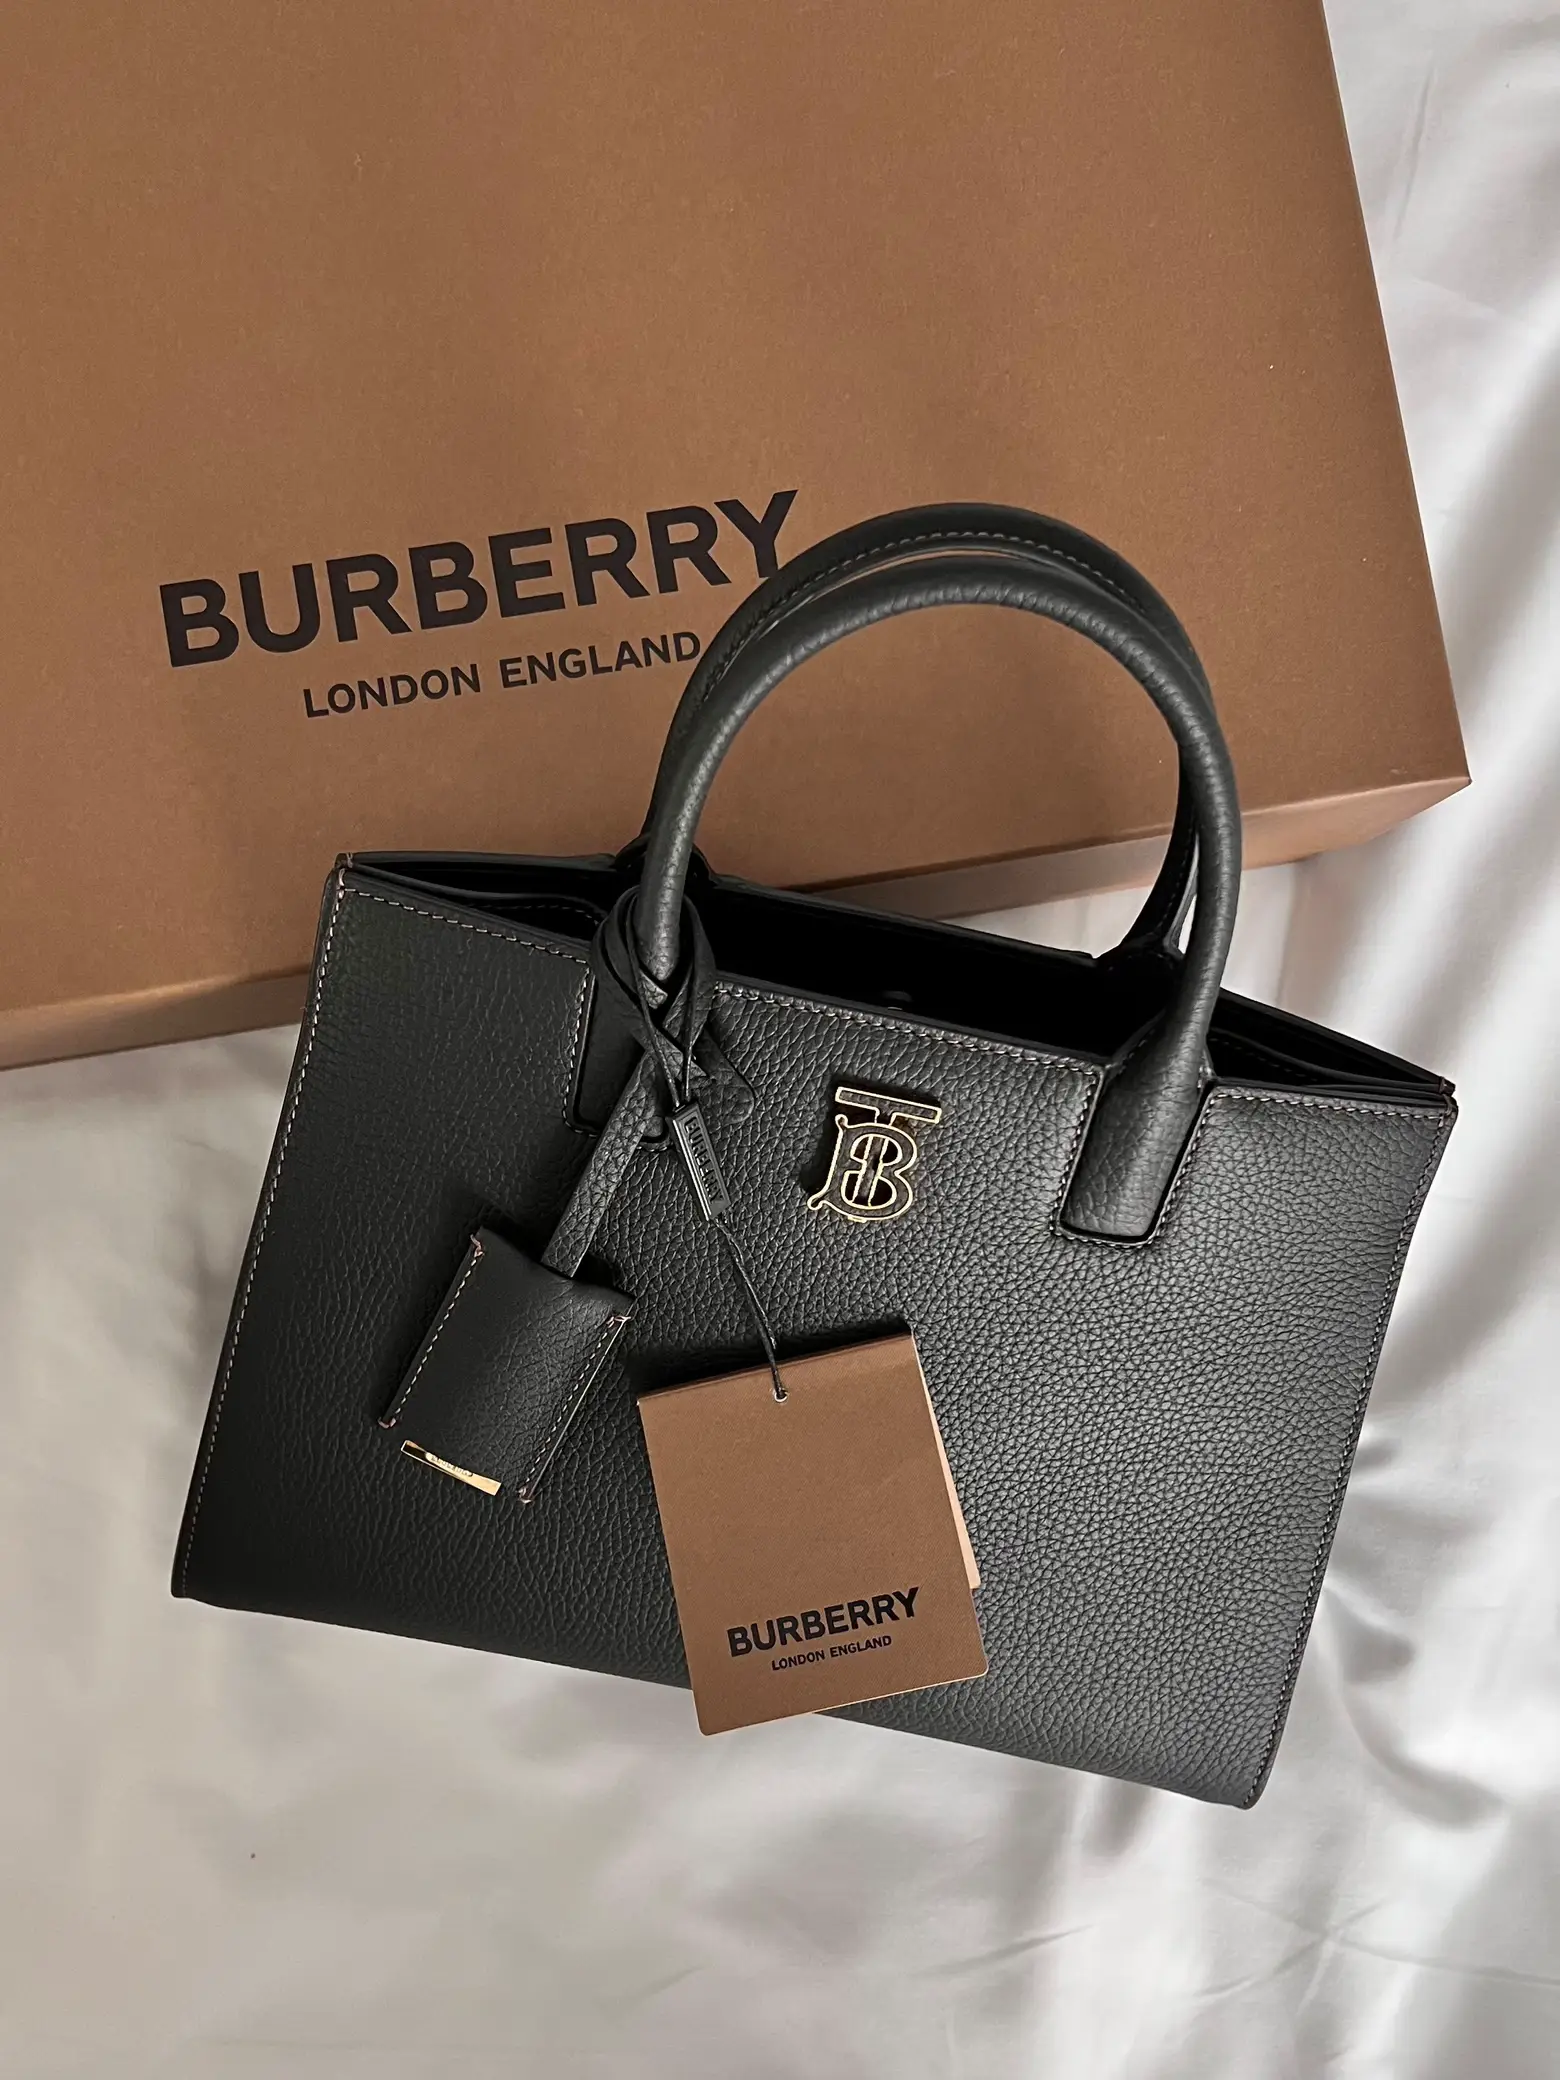 Burberry Frances Tote - Bag Review - Glam & Glitter